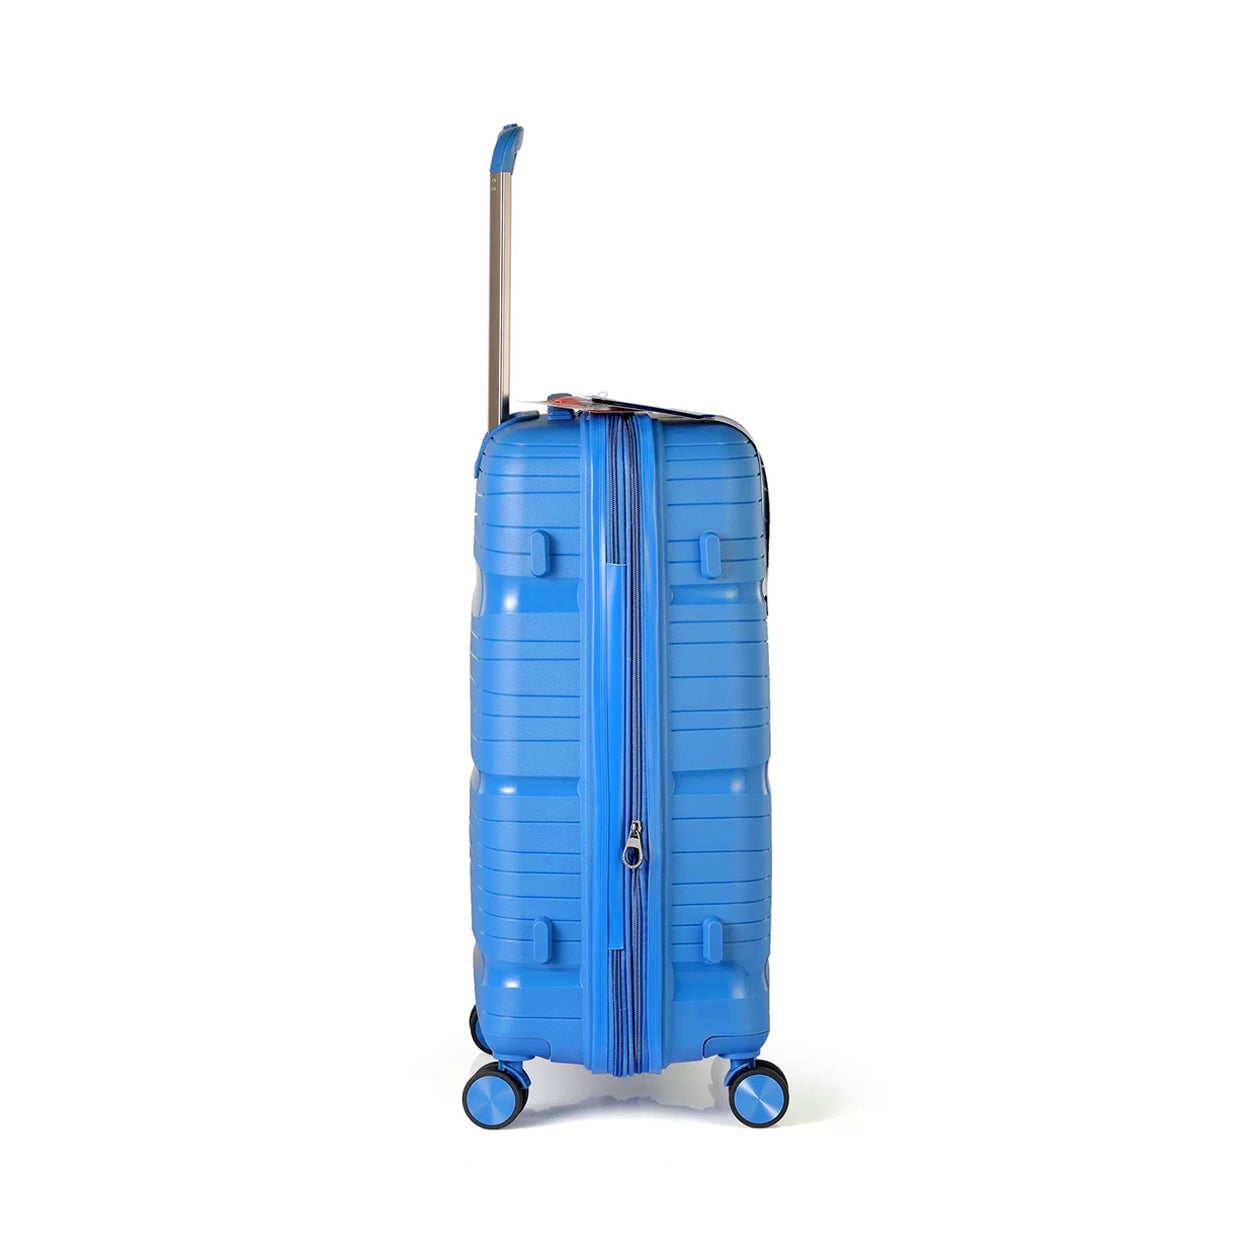 24" Sky Blue Colour Royal PP Luggage Lightweight Hard Case Trolley Bag with Double Spinner Wheel Zaappy.com